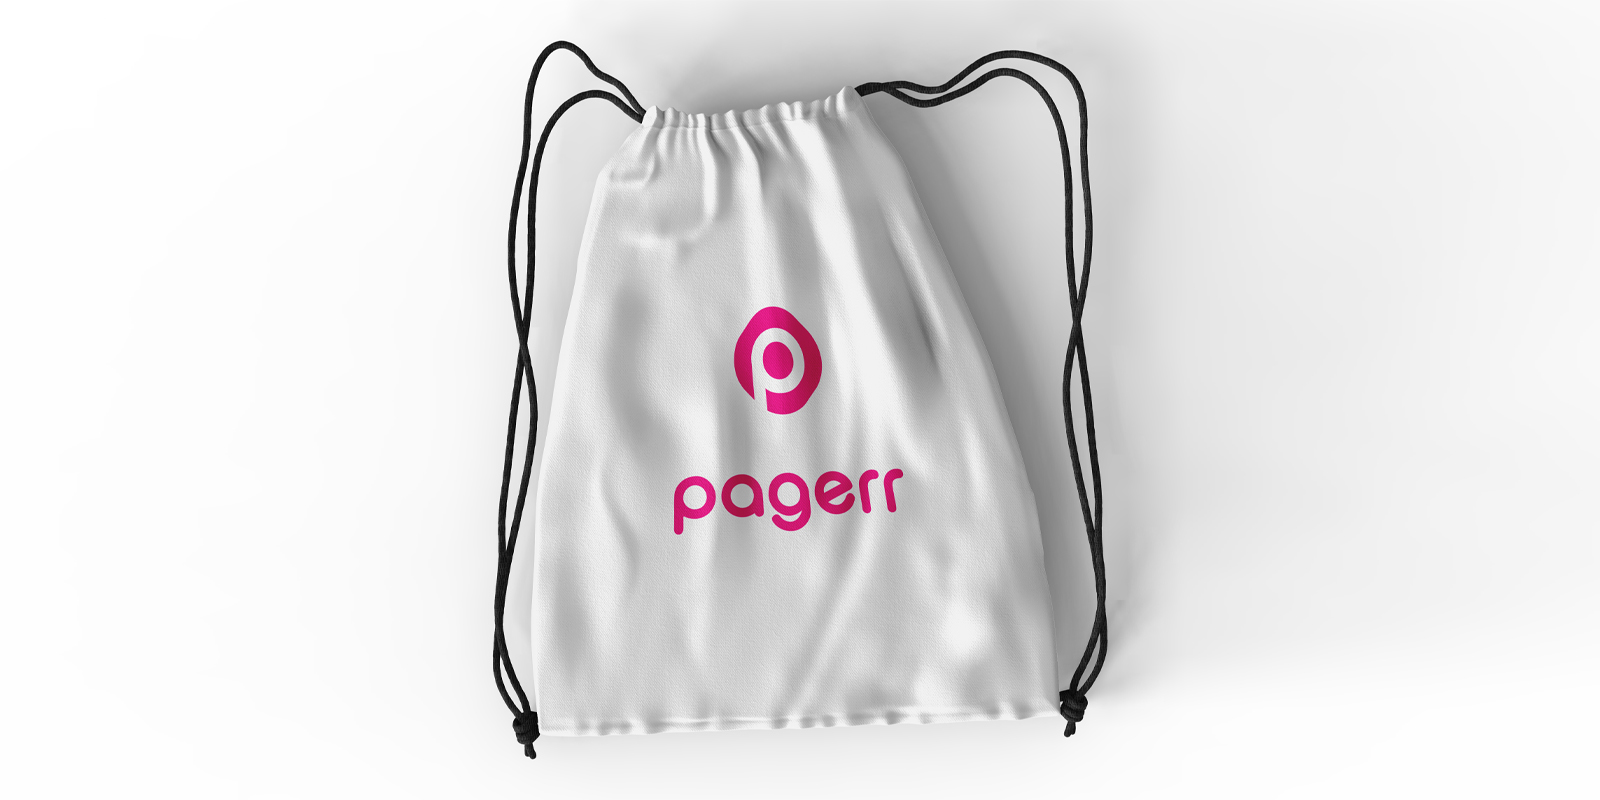 Drawstring backpacks in Paris - Print with Pagerr